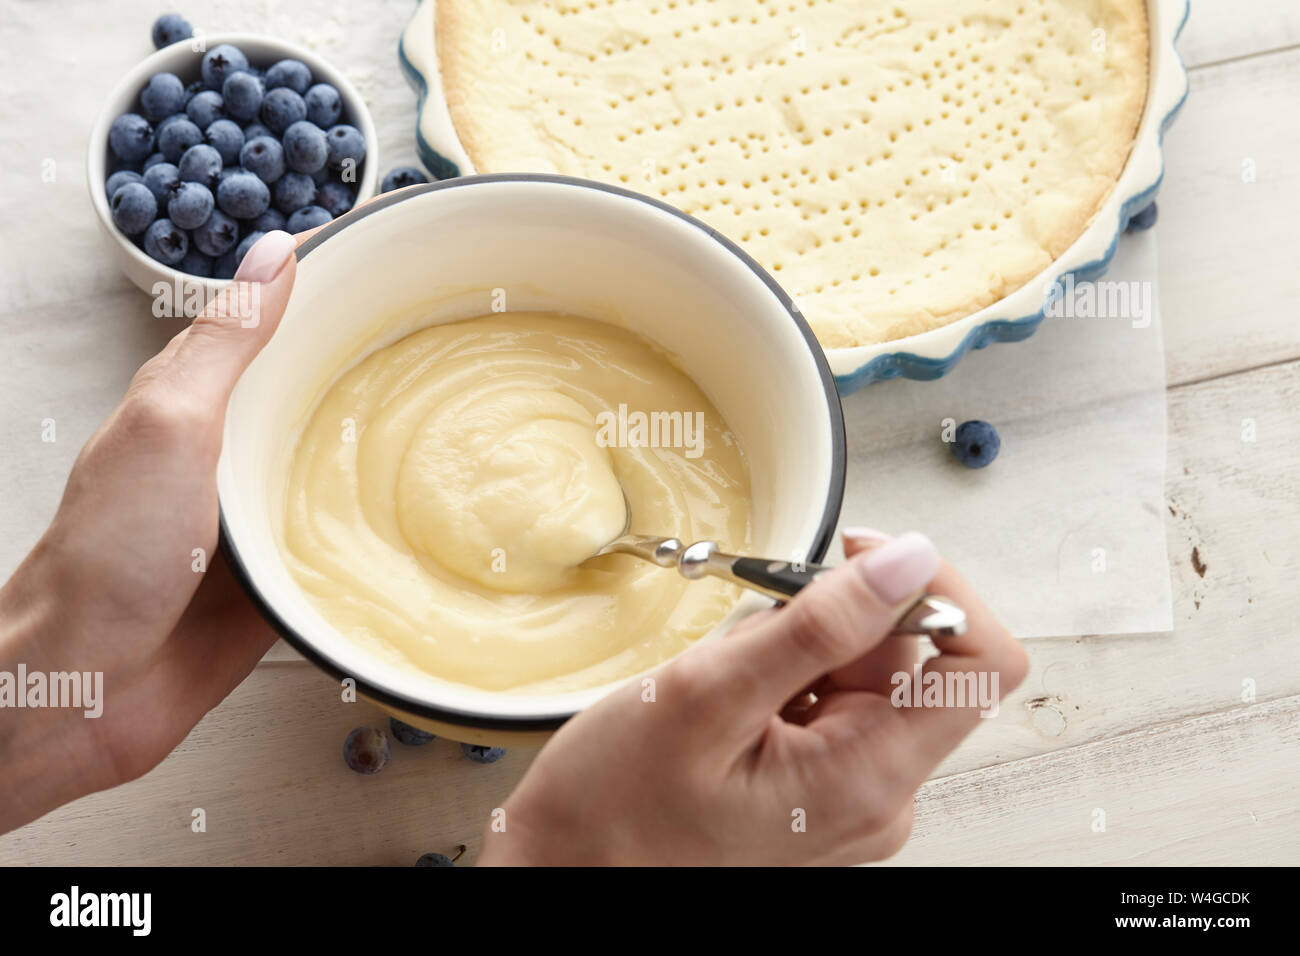 Woman preparing whipped cream for blueberry pie with fresh berries. Blueberry tart cooking recipe. Stock Photo